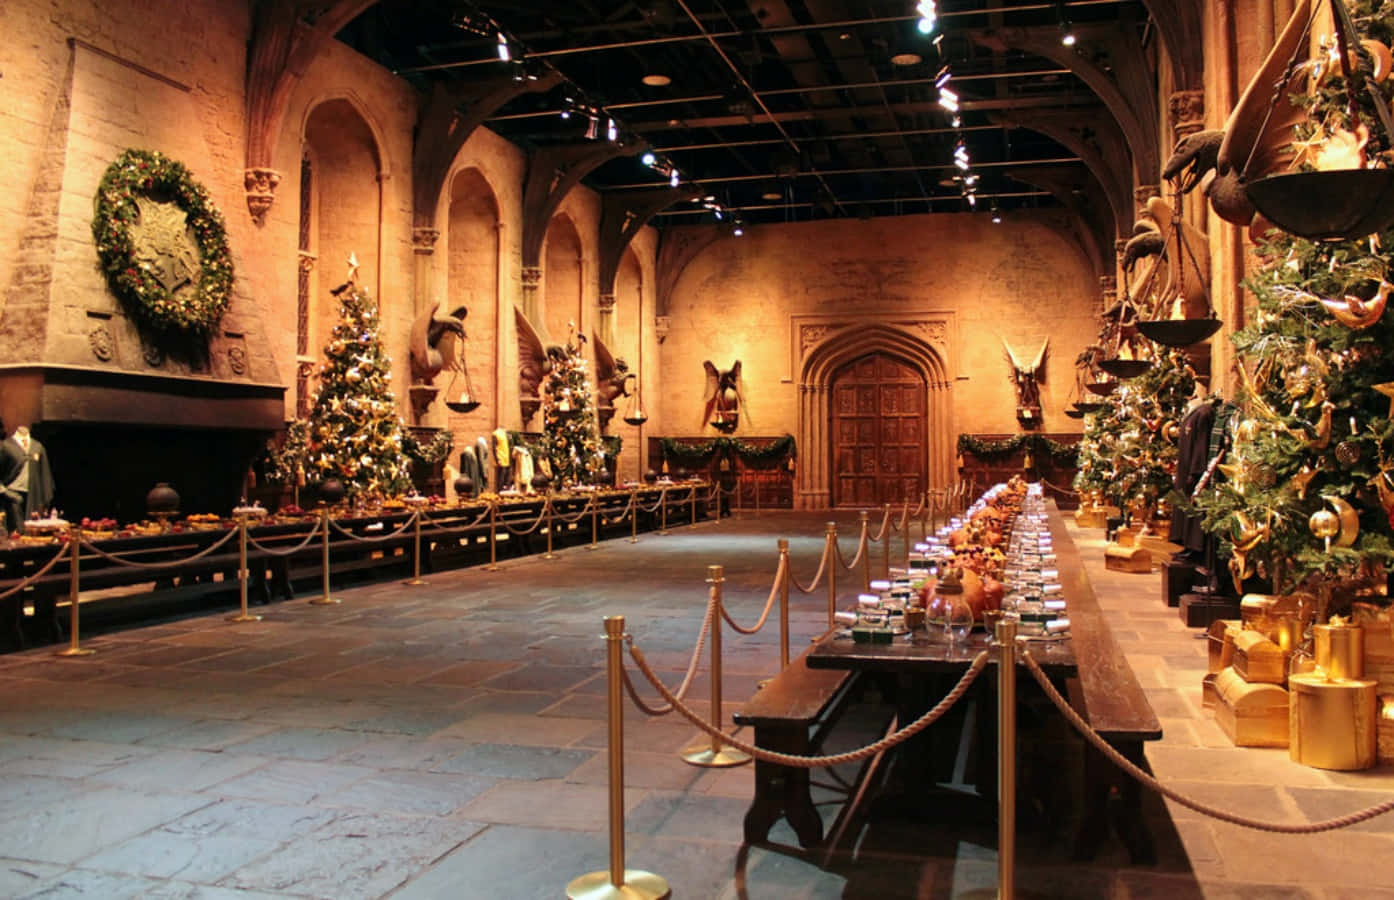 Welcome to the Great Hall at Hogwarts School of Witchcraft and Wizardry! Wallpaper